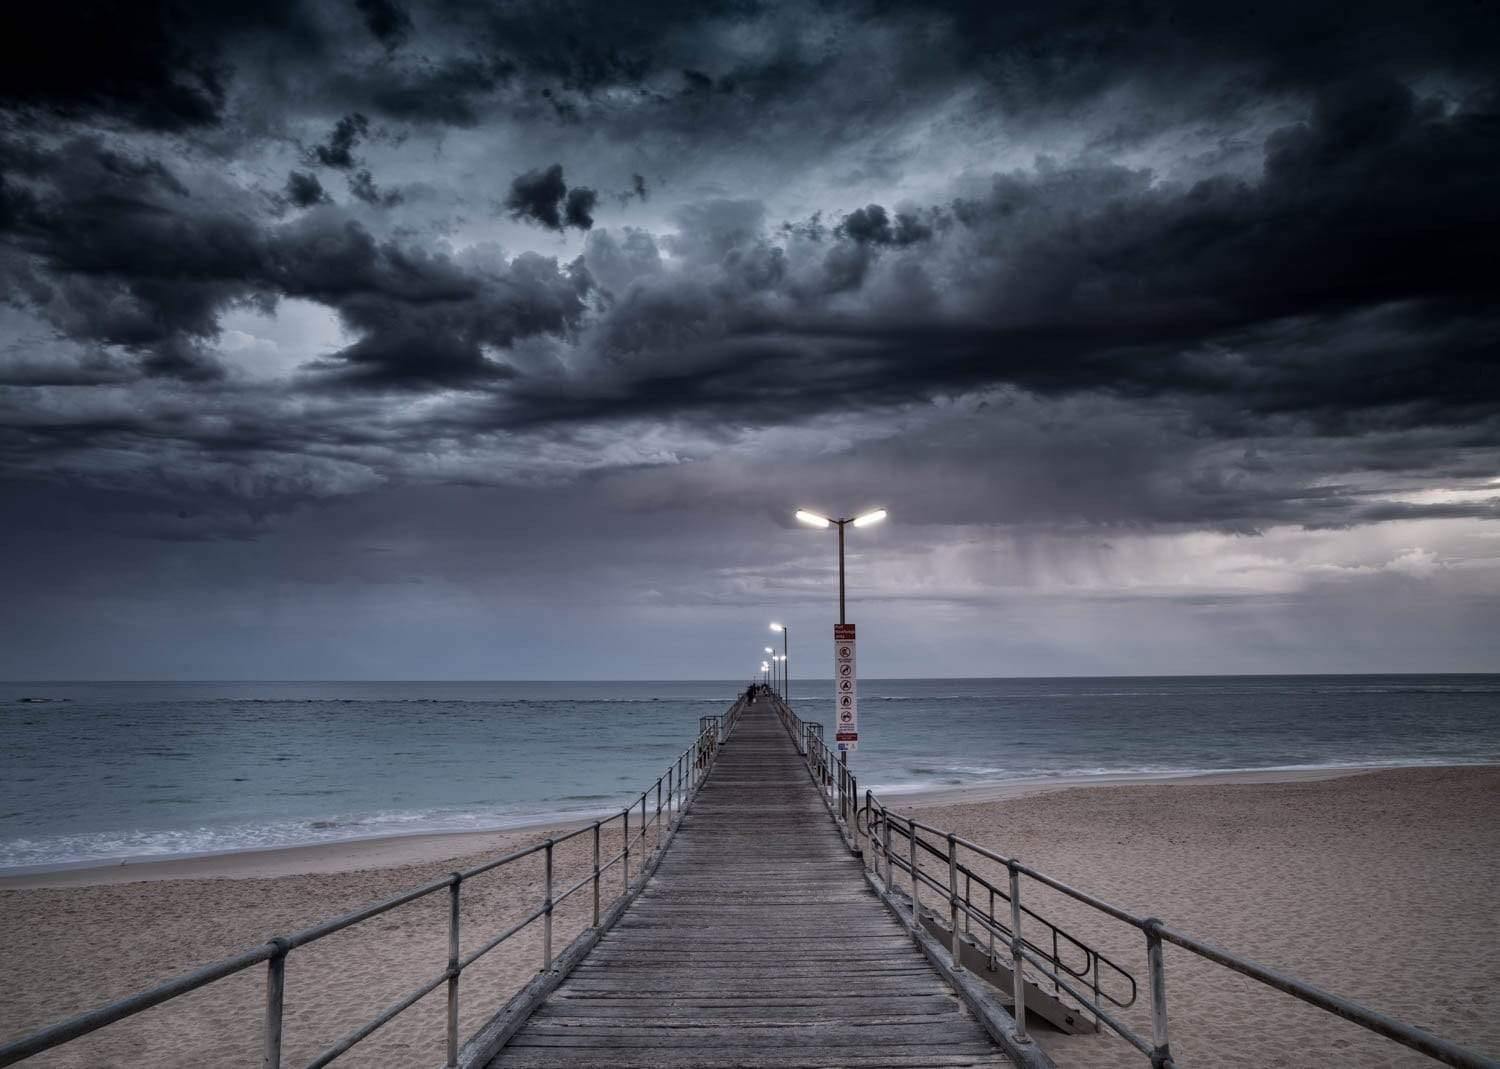 A long wooden track on a beach, and giant black thick clouds in the background, Port Noarlunga Jetty Print